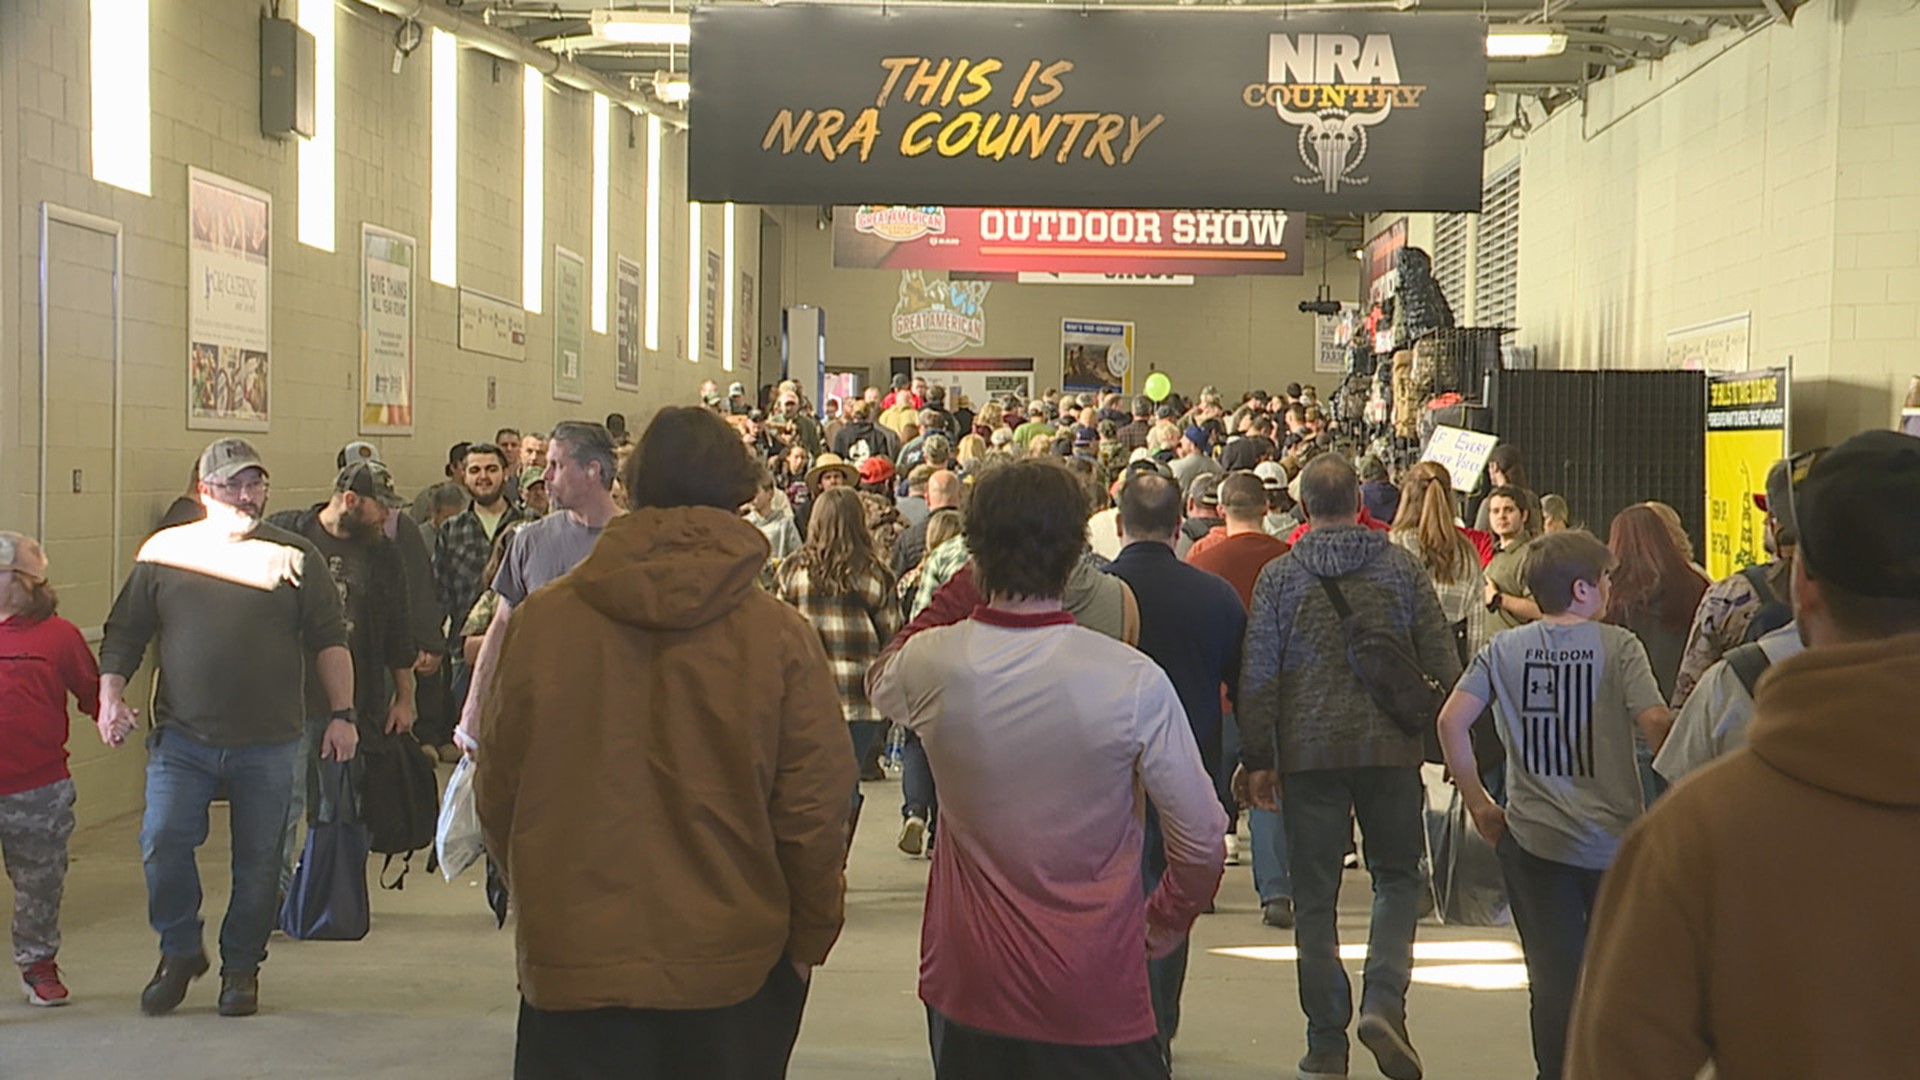 The Great American Outdoor Show returned to Harrisburg, Sunday. The annual event is hosted by the National Rifle Association.